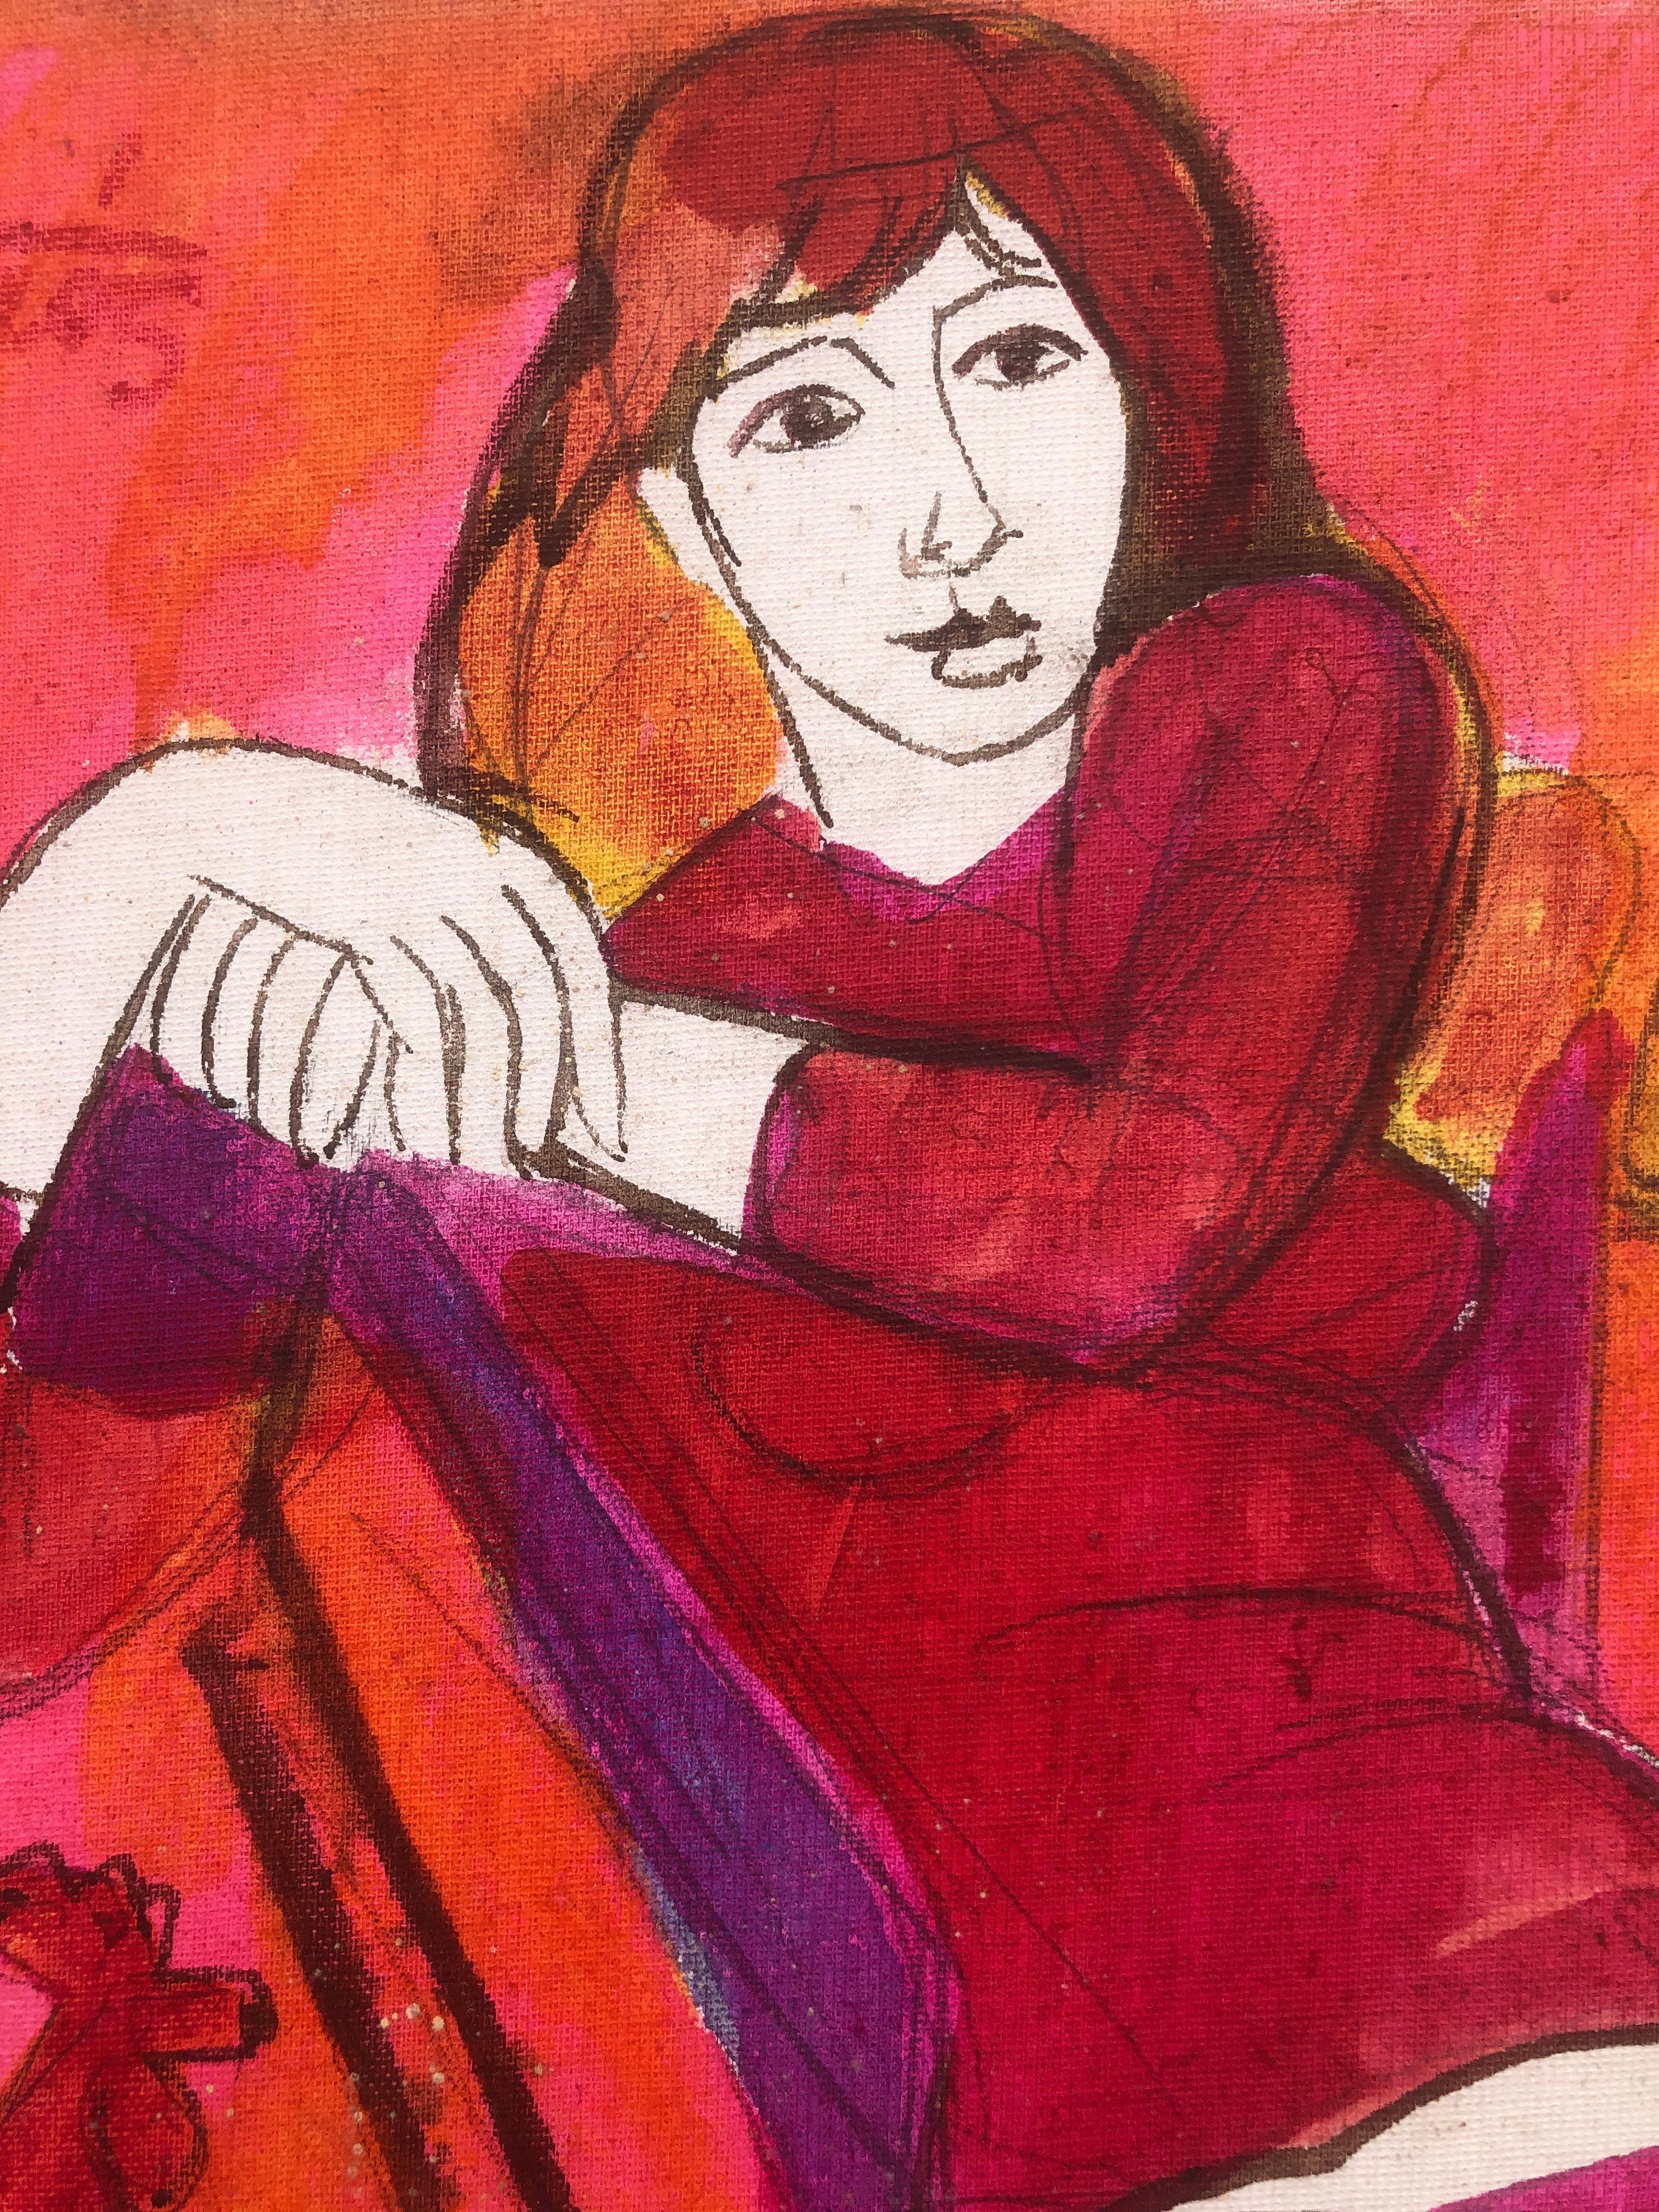 Woman posing mixed media painting - Fauvist Painting by Jordi Curos